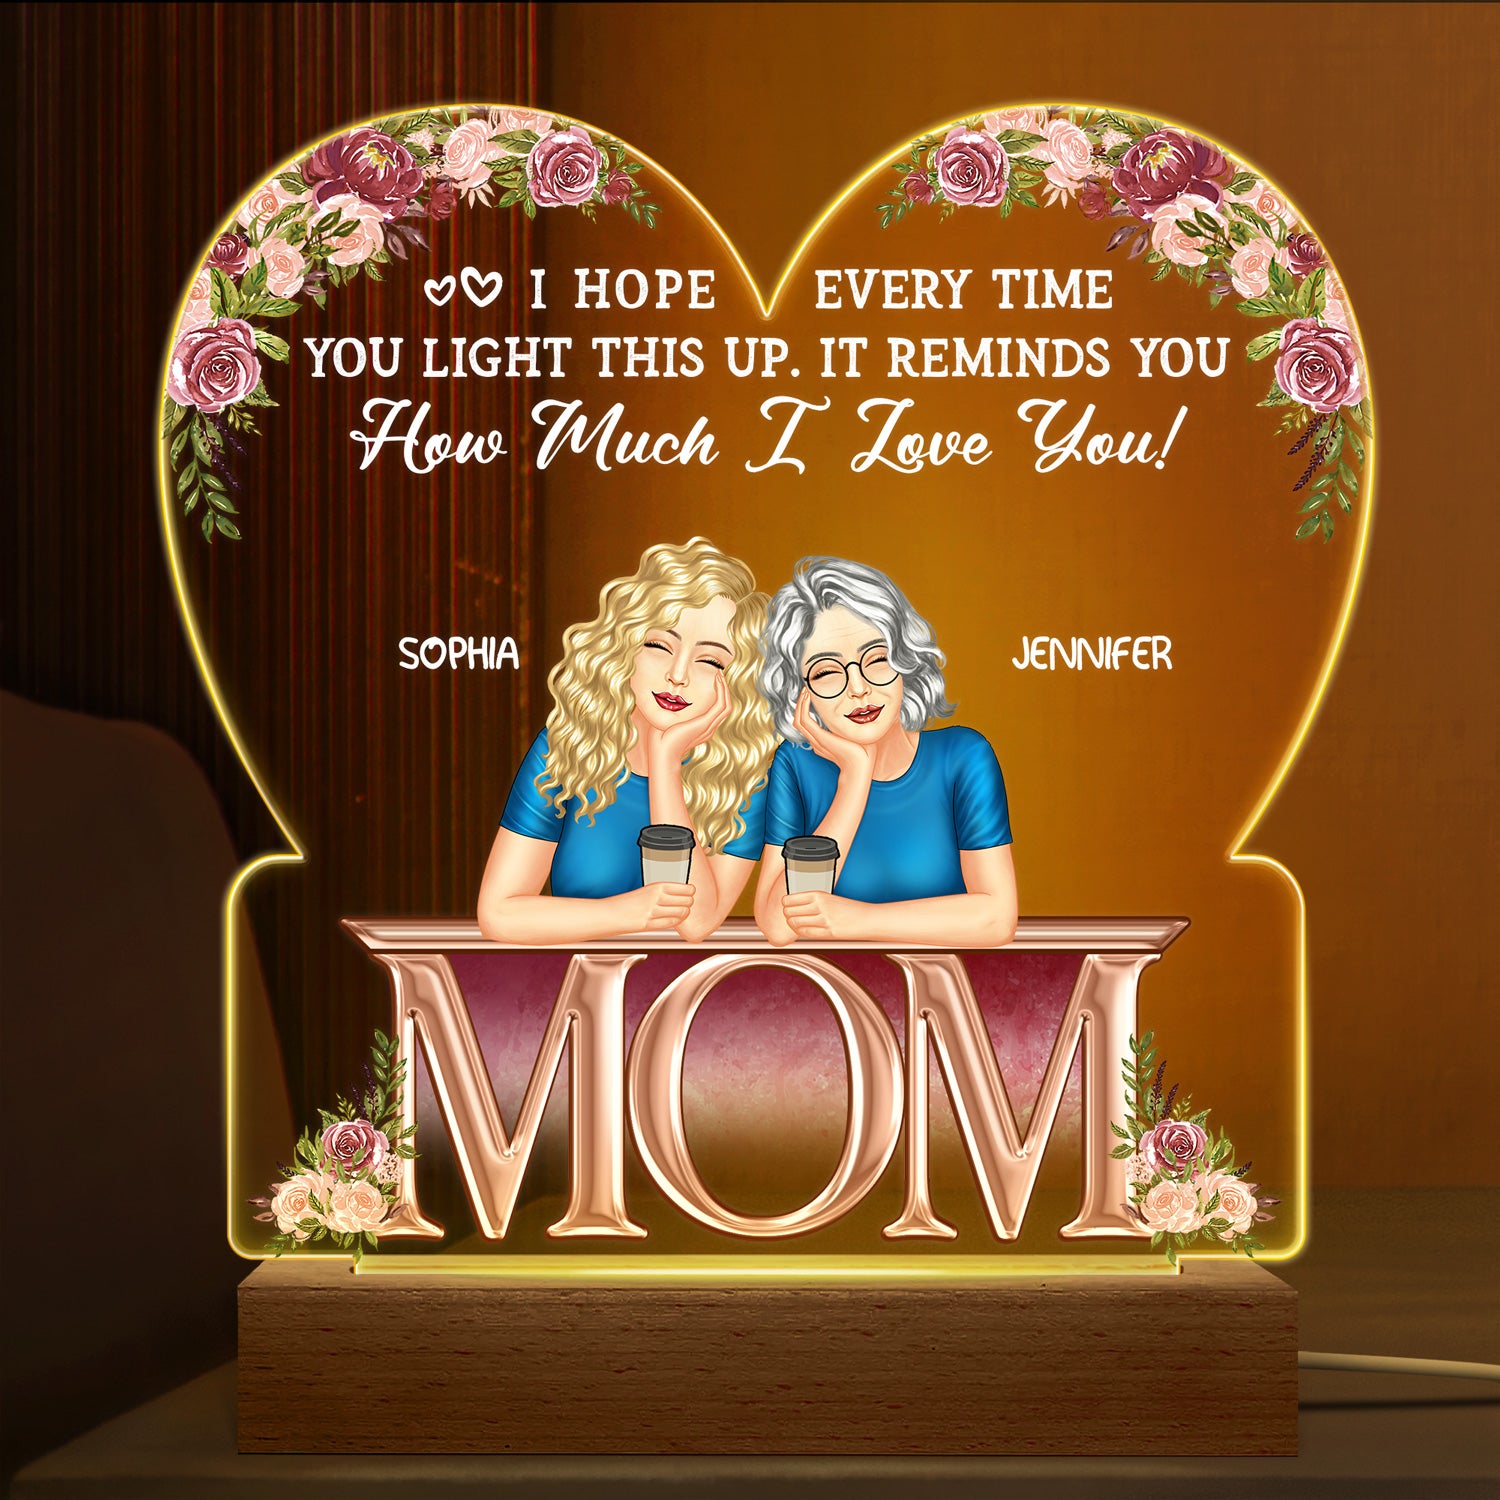 It Reminds You How Much We Love You - Birthday, Loving Gift For Mom, Mother, Grandma, Grandmother - Personalized Custom 3D Led Light Wooden Base